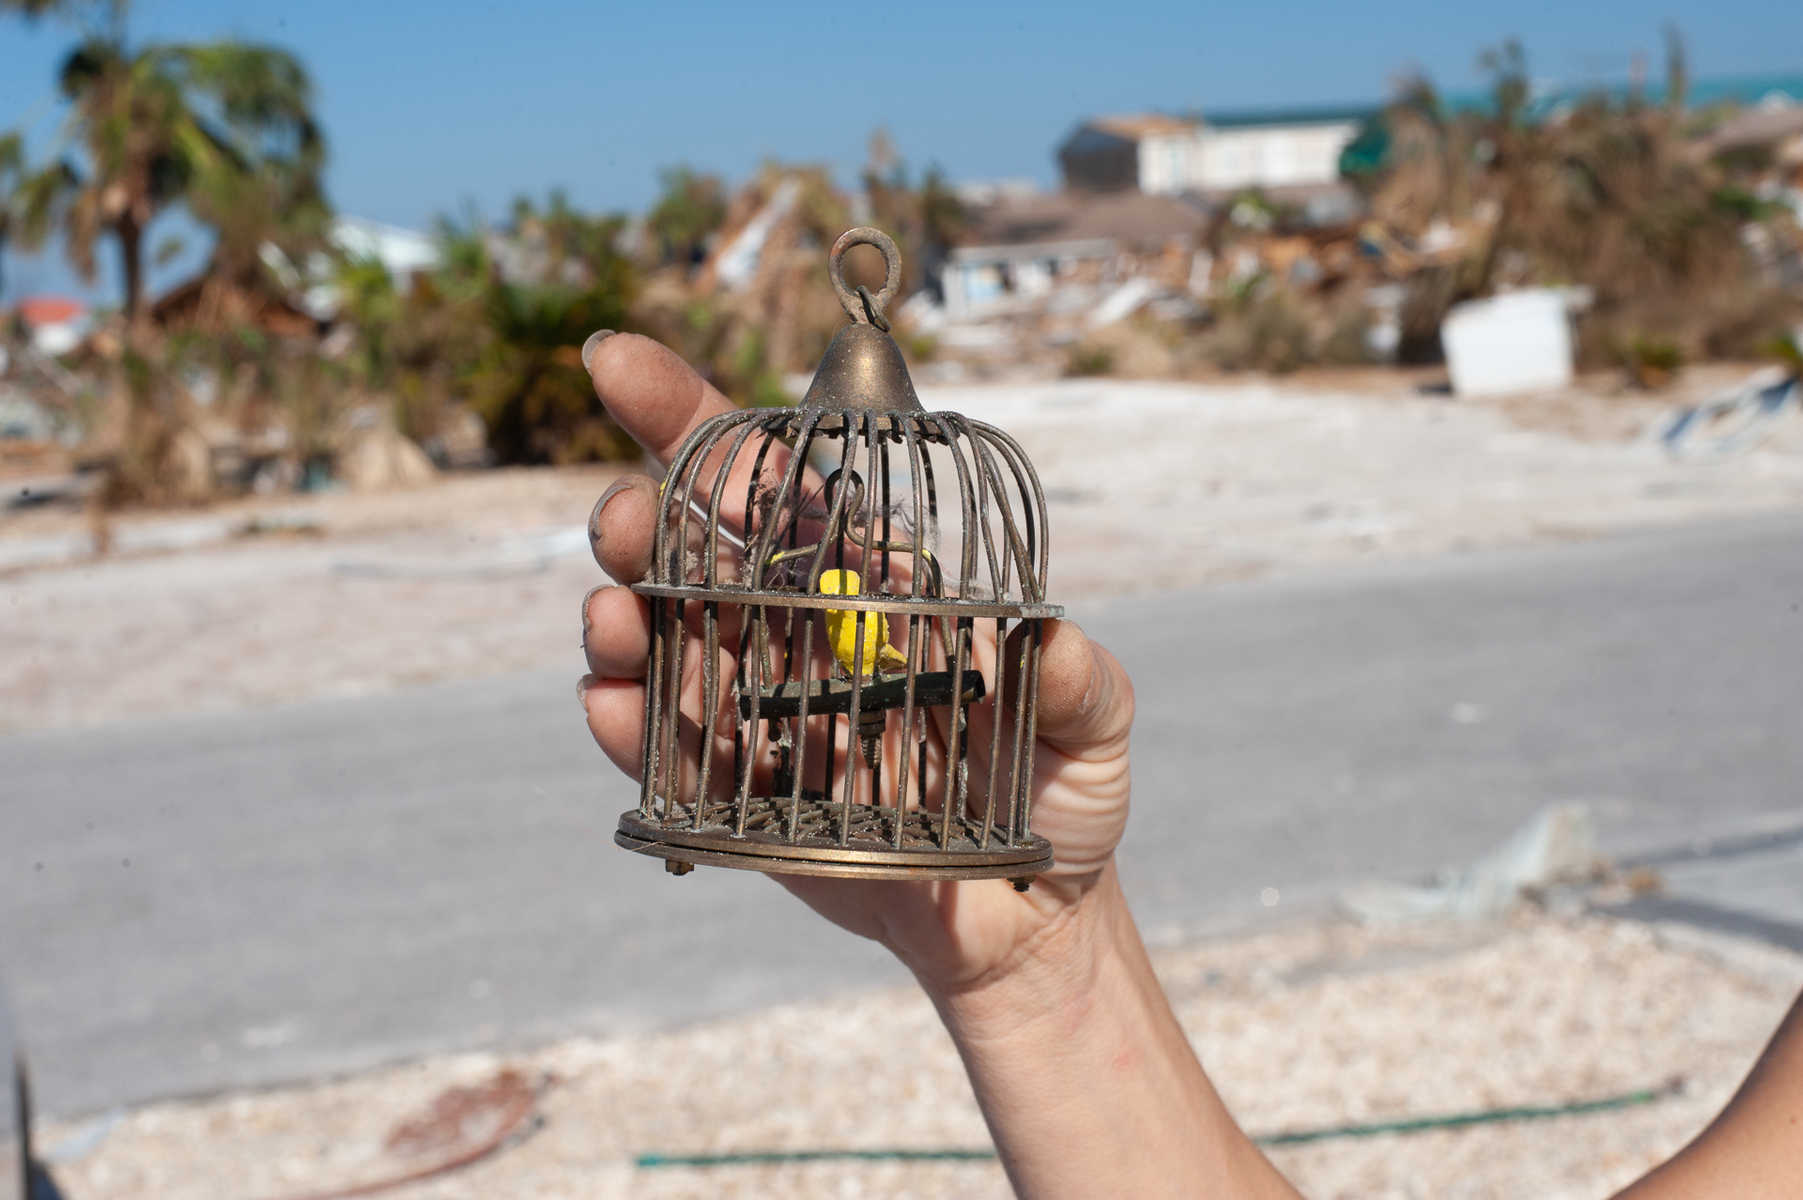 October 18, 2018 - Mexico Beach, FL - Adelete Mamary of Atlanta holds what is left of her vacation home in Mexico Beach, Florida after Hurricane Michael as passed through the area on October 10, 2018. Florida.  The hurricane hit the Florida Panhandle as a category 5 storm causing massive damage and claimed the lives of more then a dozen people.